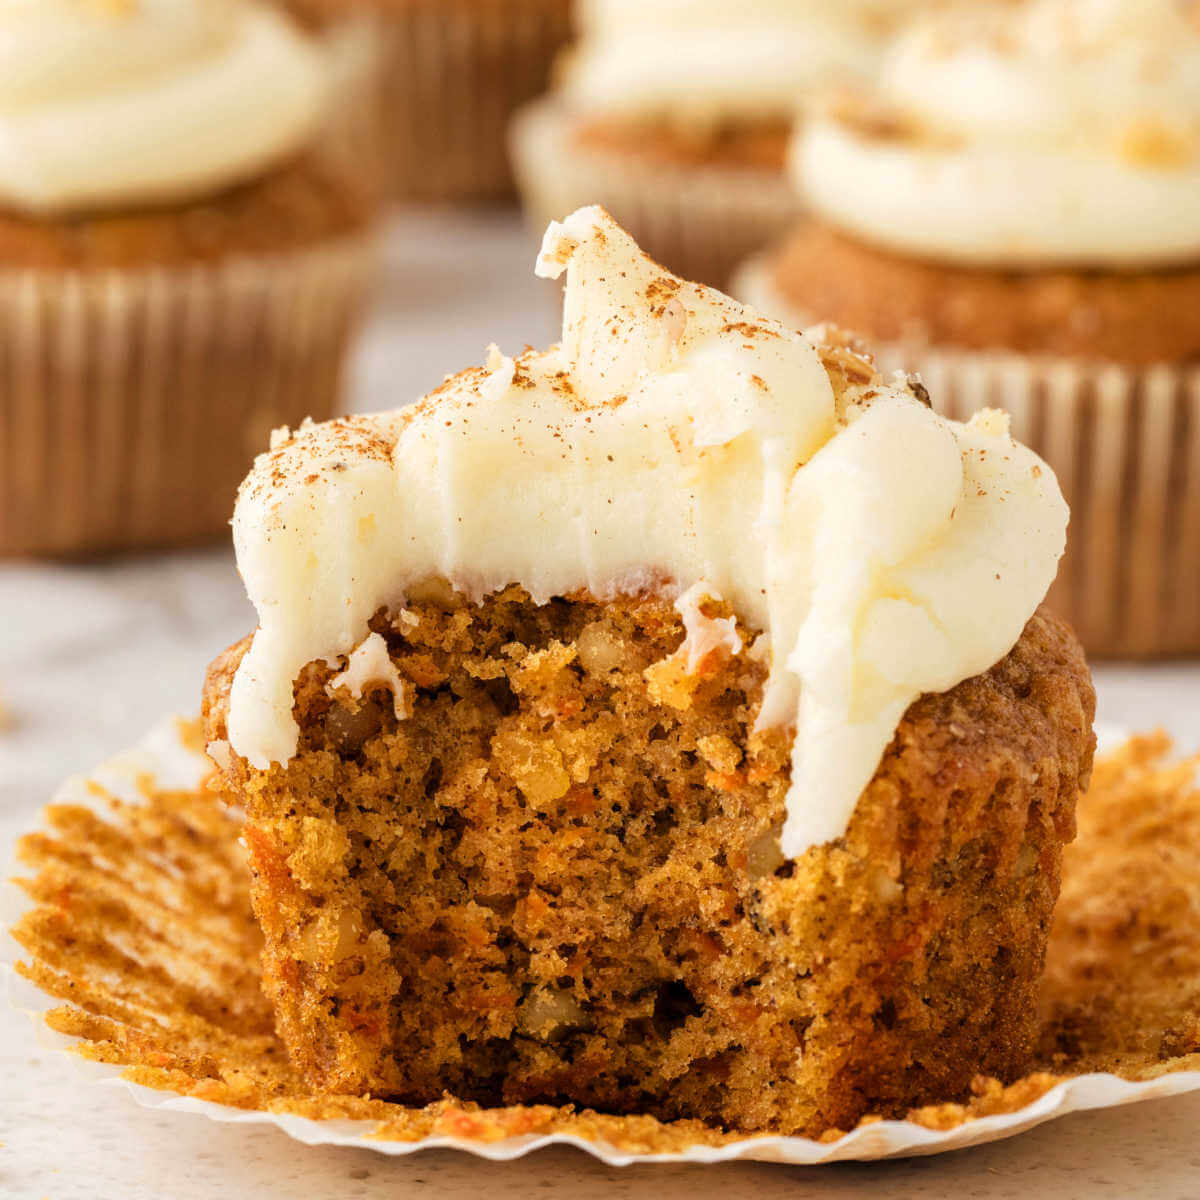 A carrot muffin with cream cheese frosting with a bite missing on a paper liner.